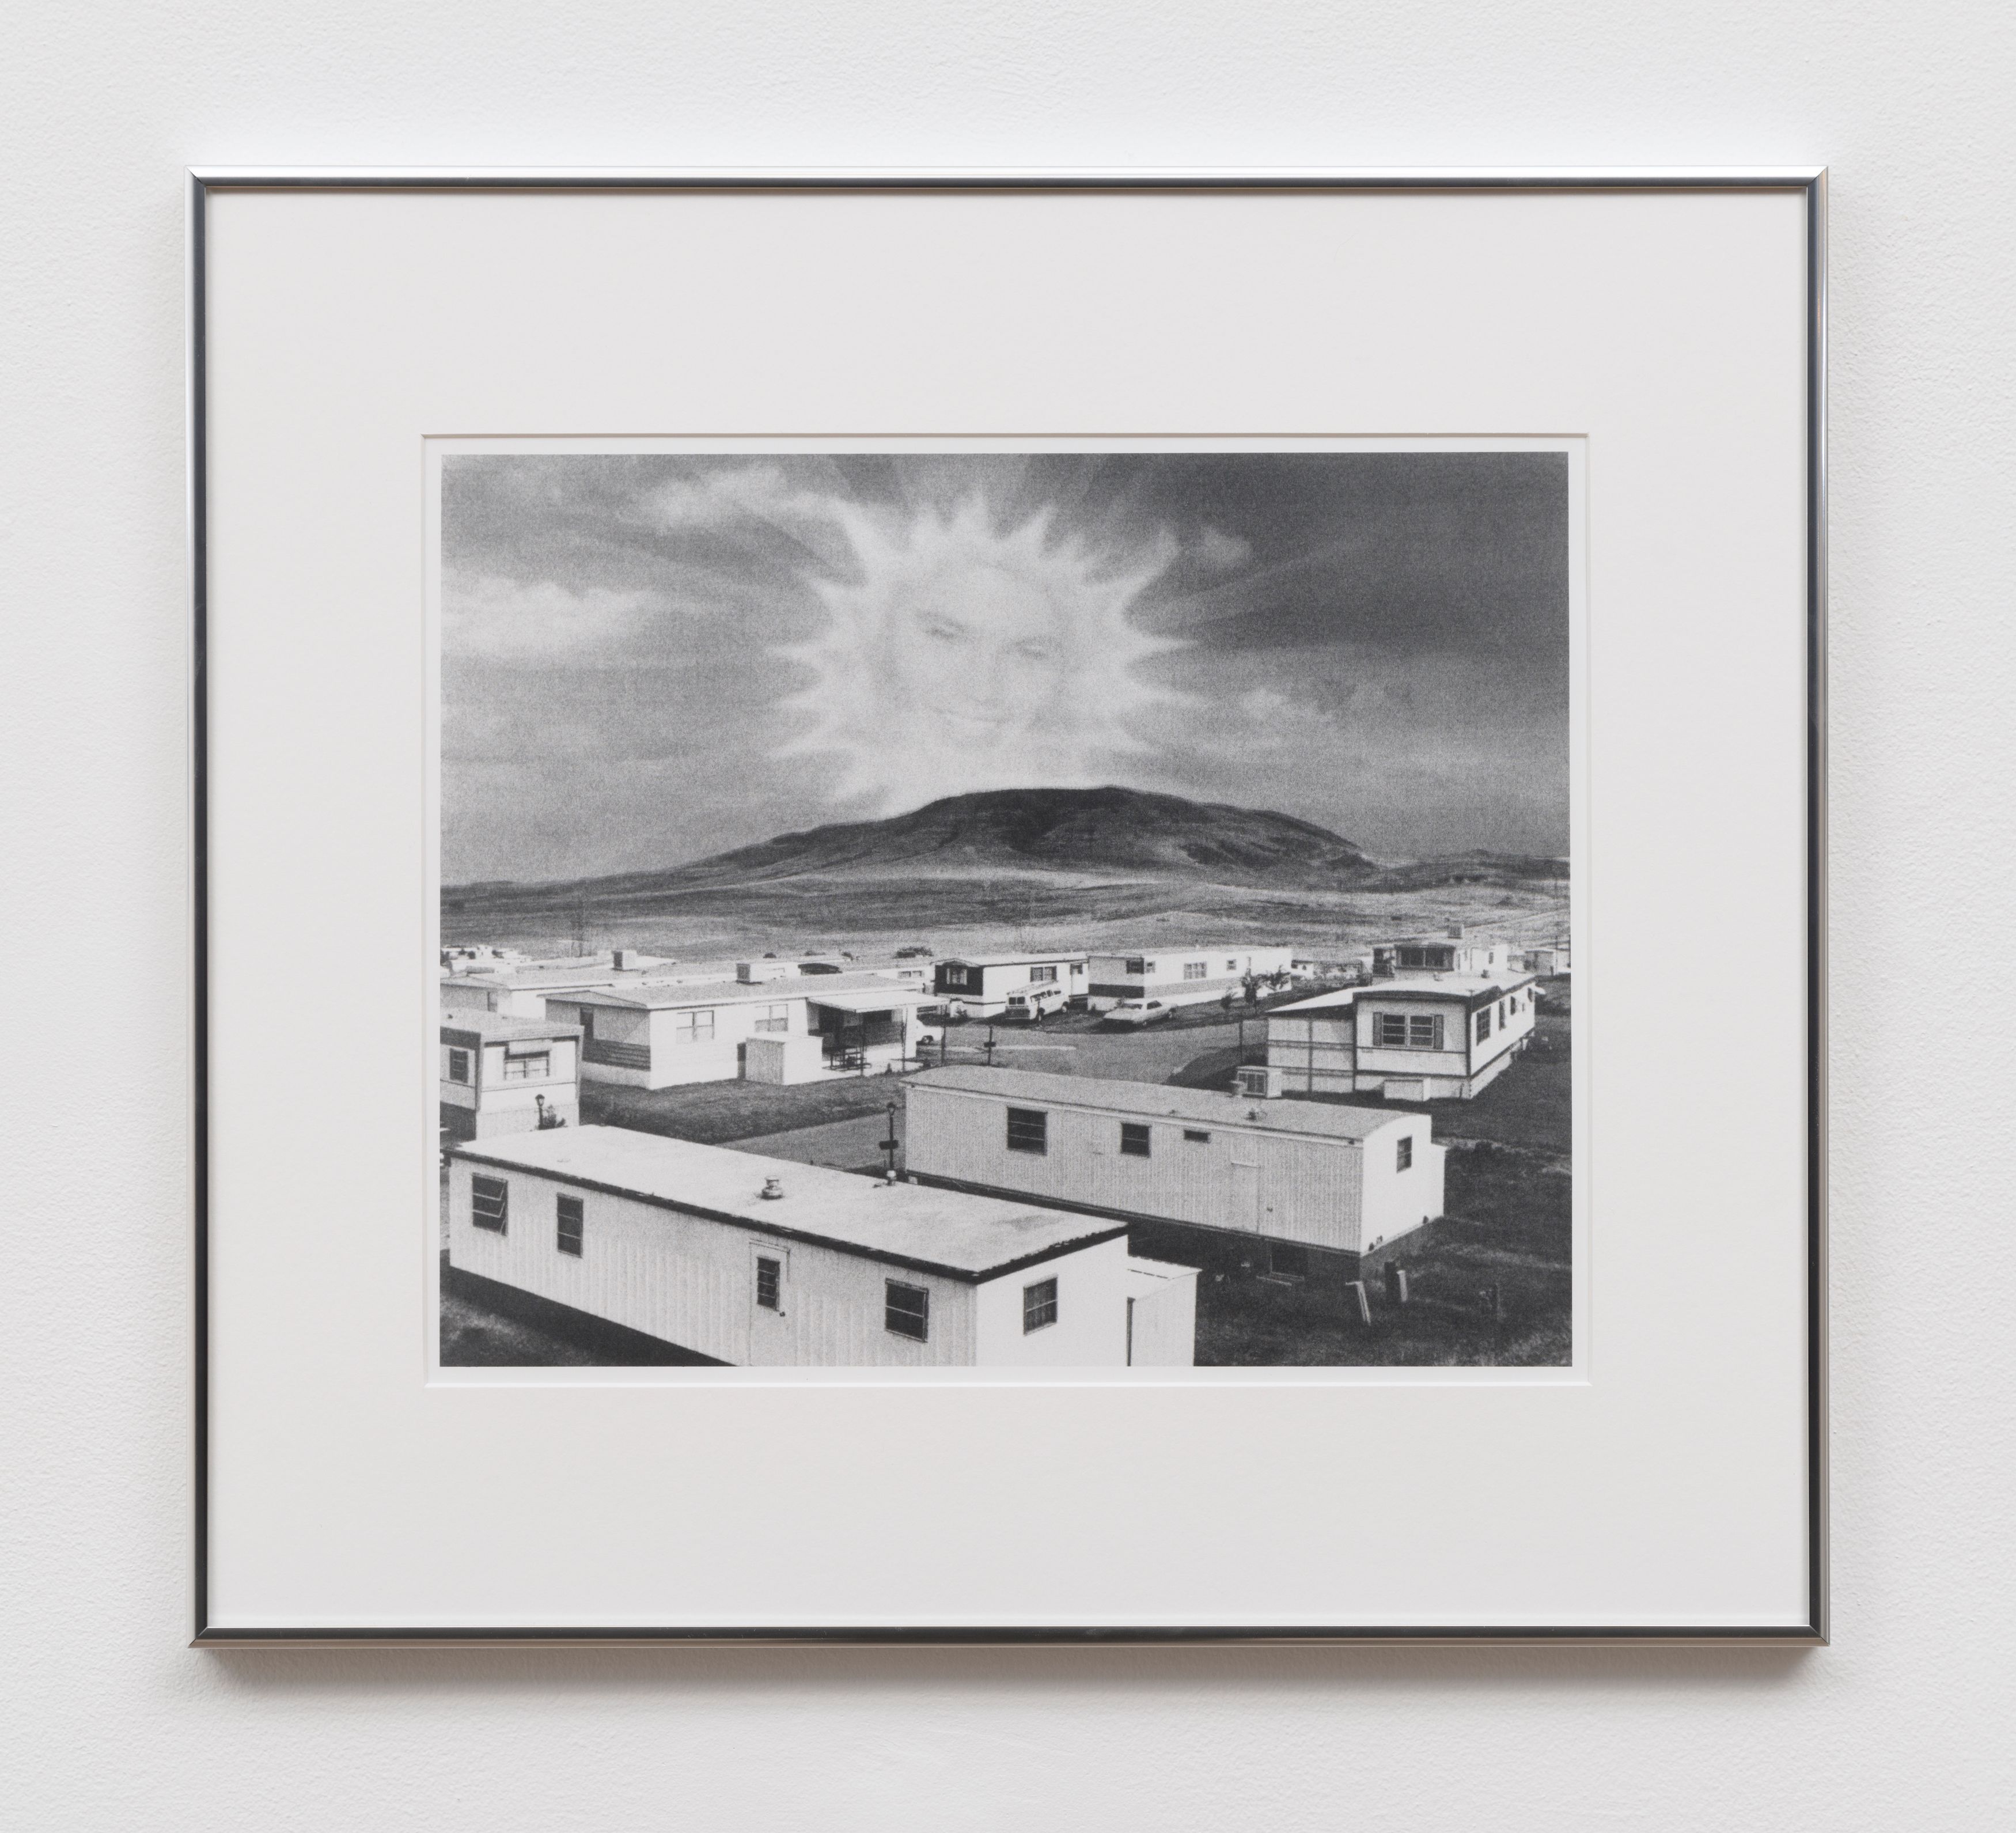 Erin Calla Watson, Mobile homes, Jefferson County, 2023, gelatin silver print, 11 3/8 x 14 in. (28.83 x 35.56 cm) (image size), 18 x 20 in. (45.72 x 50.08 cm) (framed size), edition of 3 with 2 AP